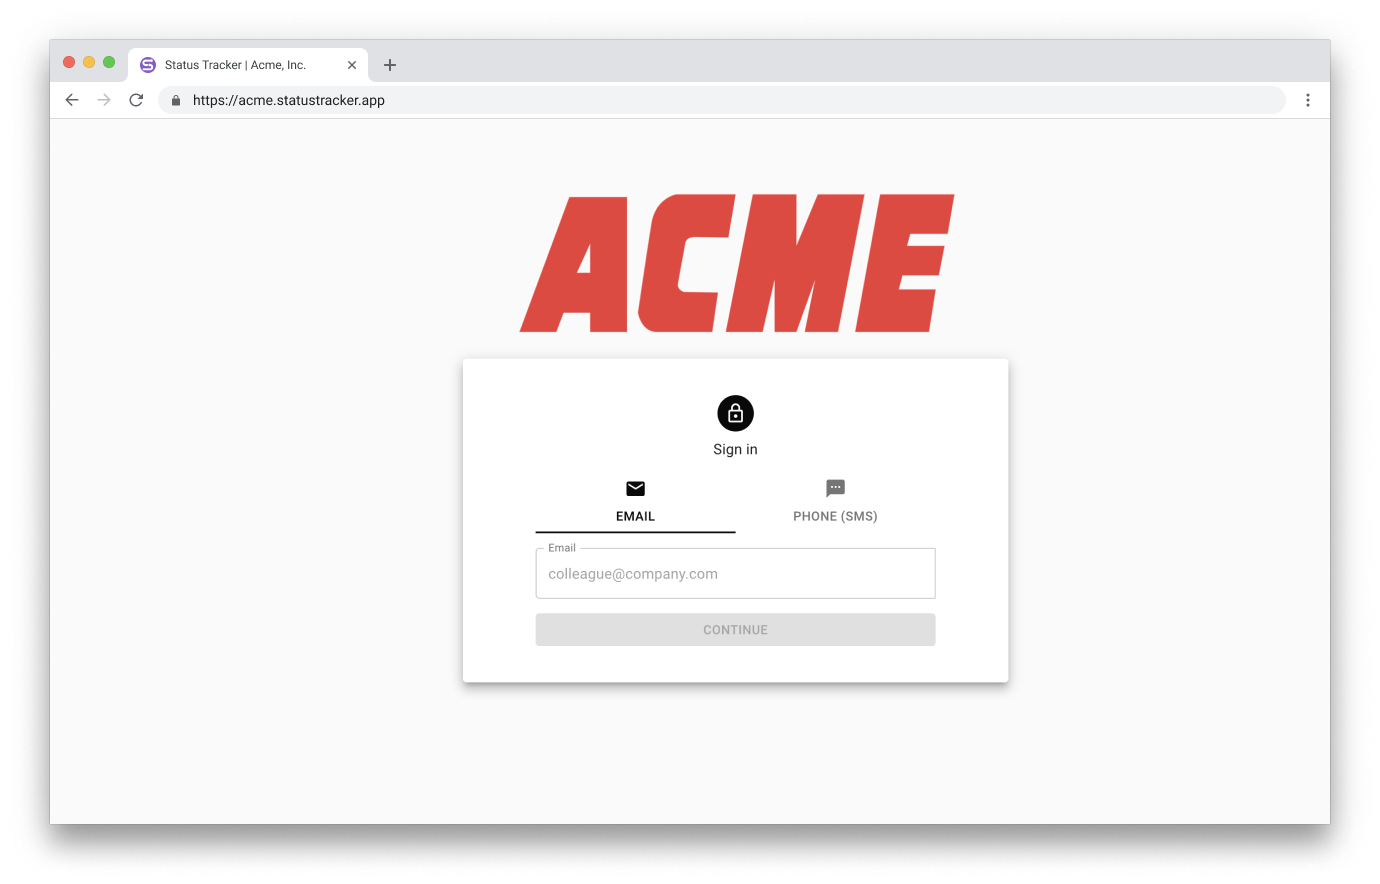 A screenshot of a login page at acme.statustracker.app with the logo for Acme, Inc. The page is using the color scheme of Acme, Inc. - red and black.